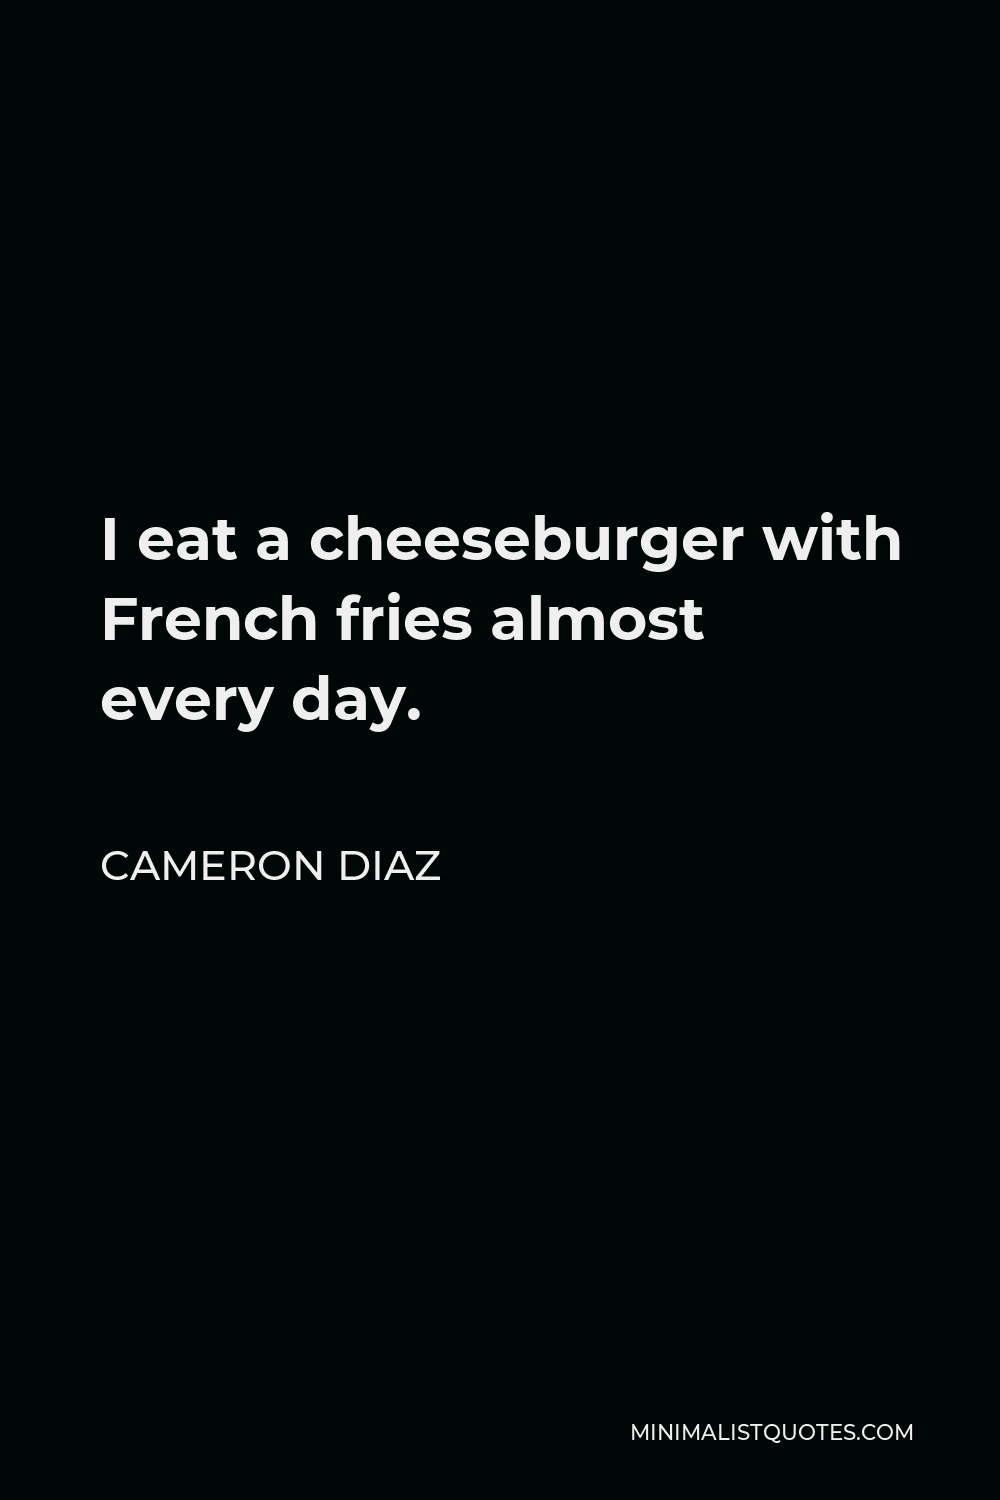 Cameron Diaz Quote - I eat a cheeseburger with French fries almost every day.